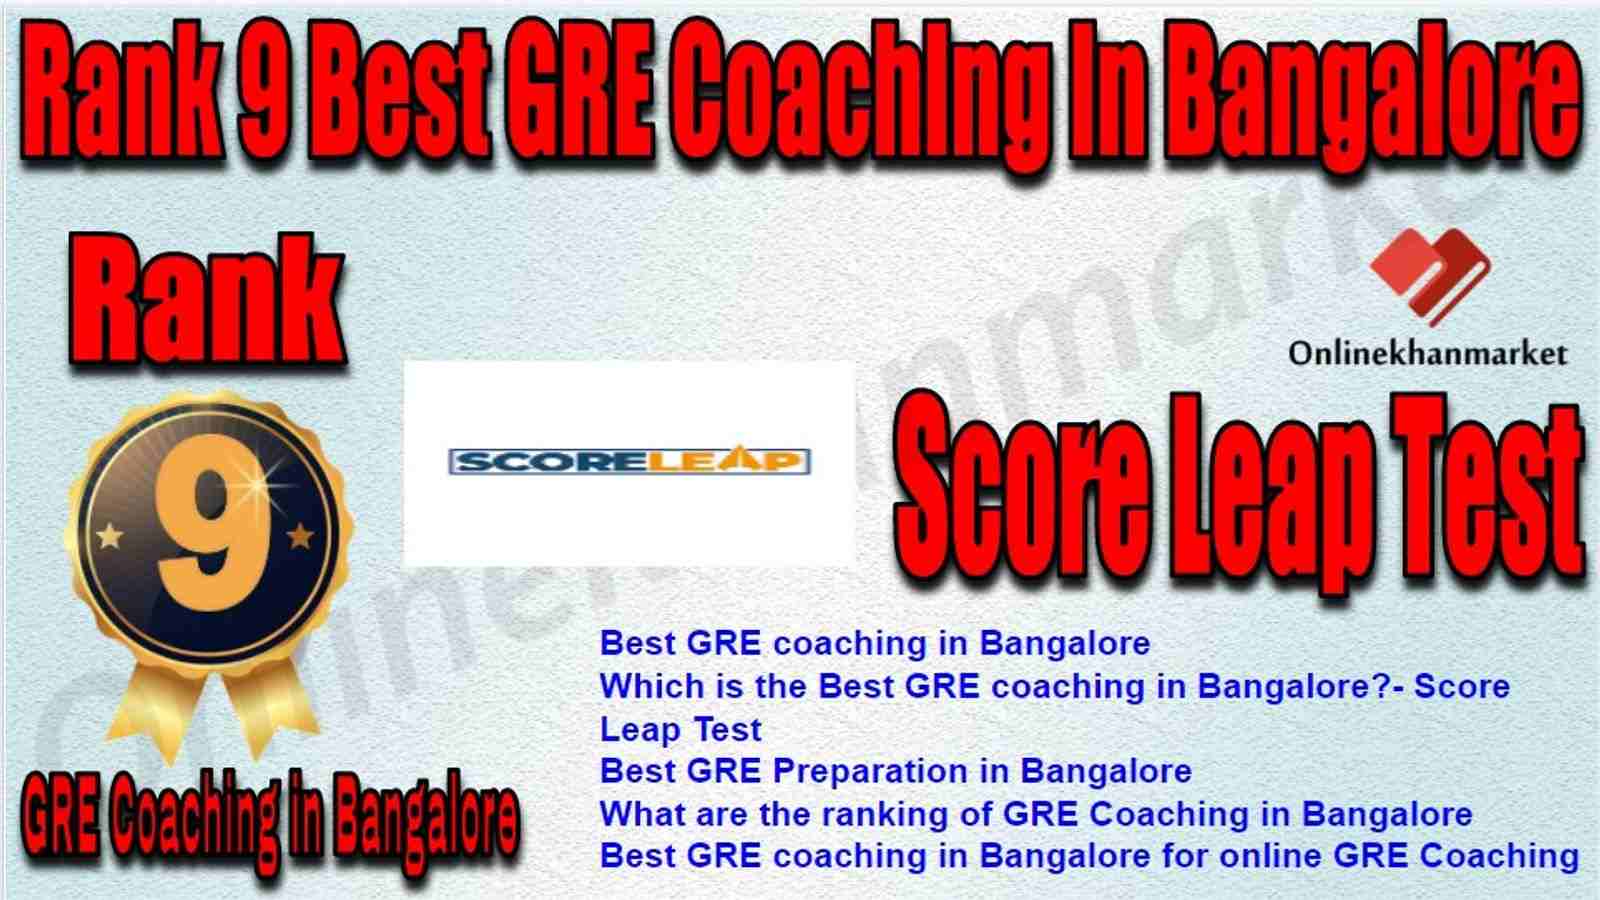 Rank 9 Best GRE Coaching in Bangalore